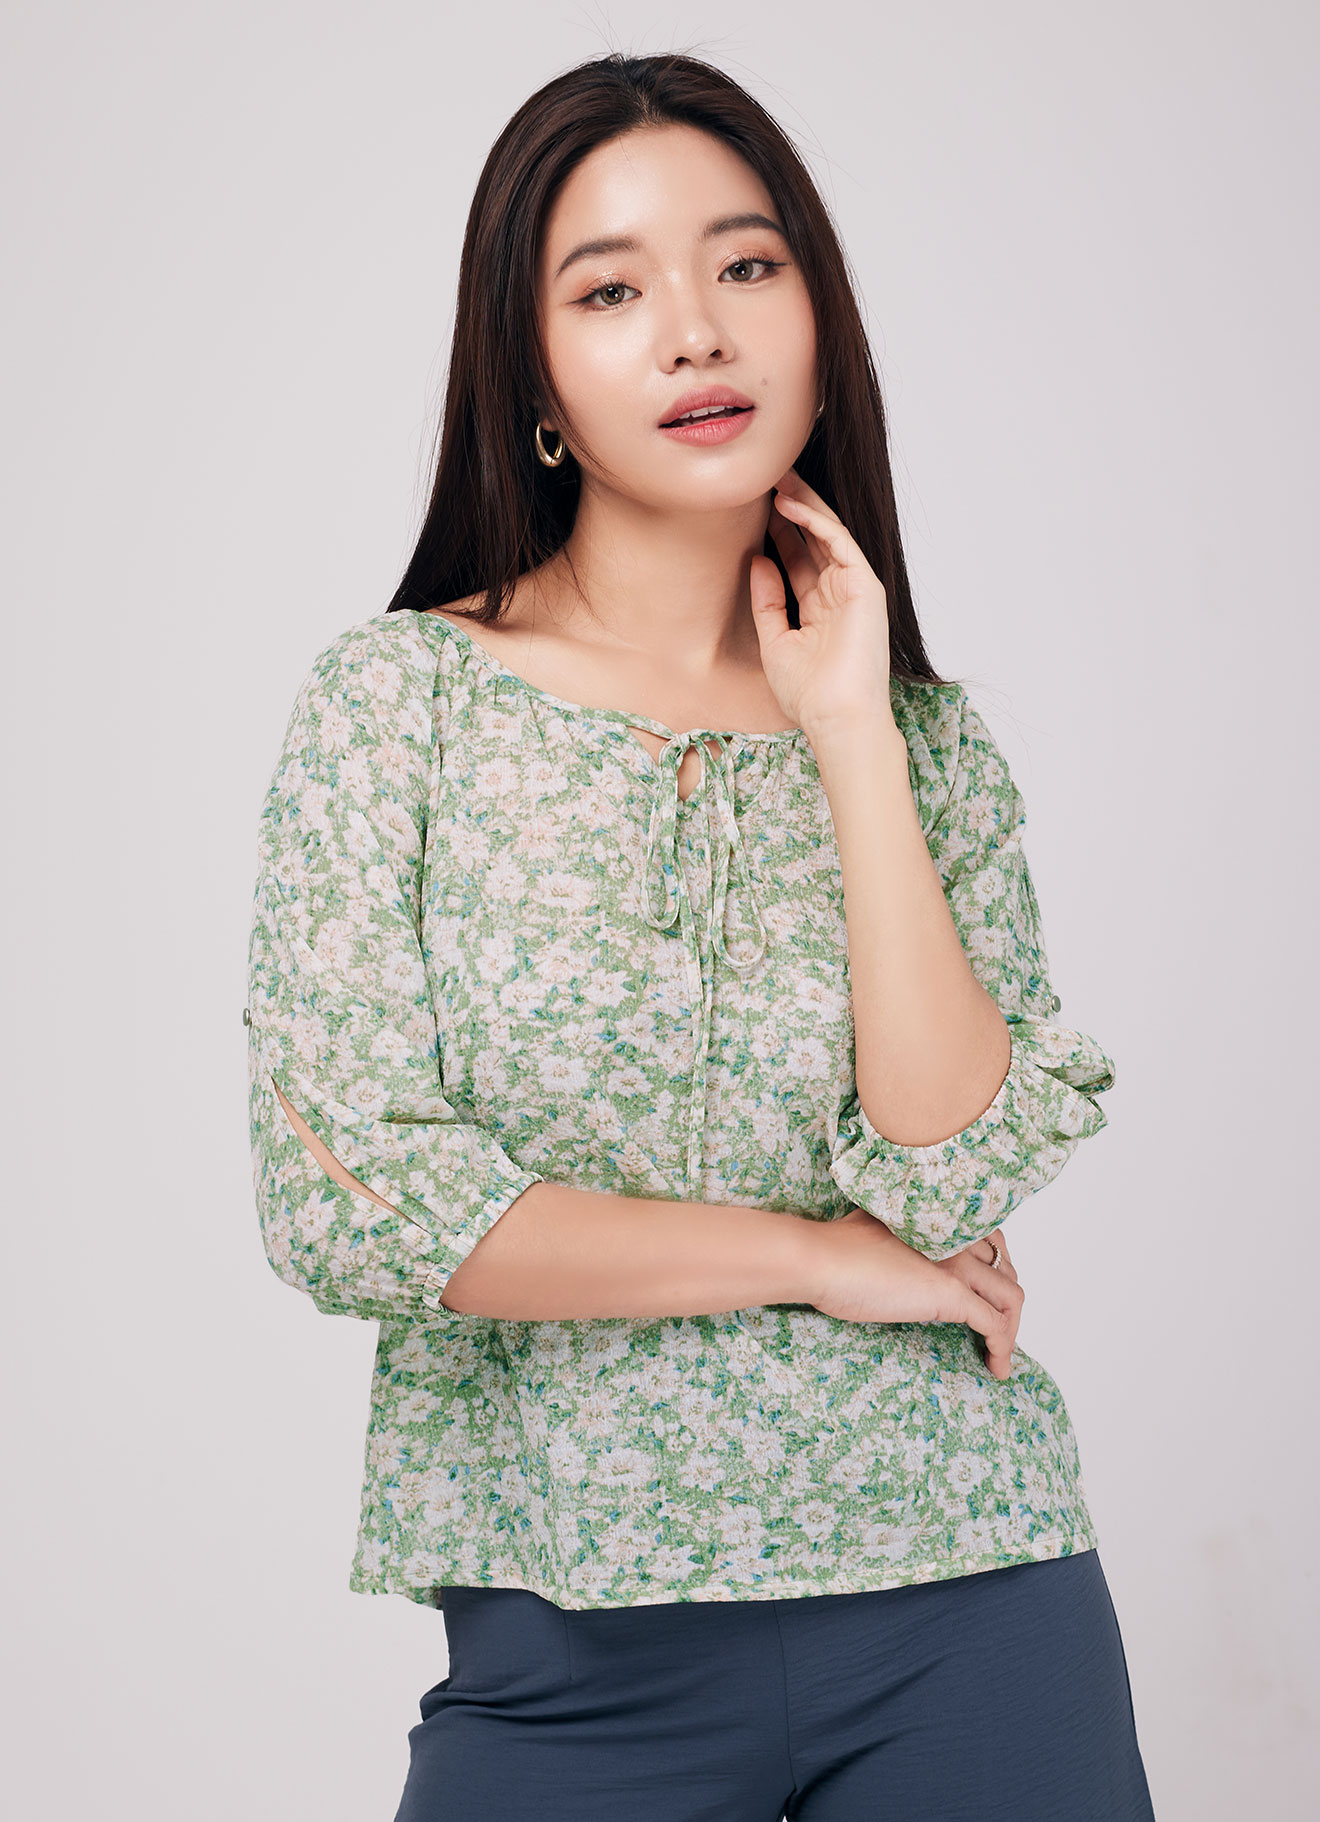 Fluorite-Green by Floral Printed Blouse